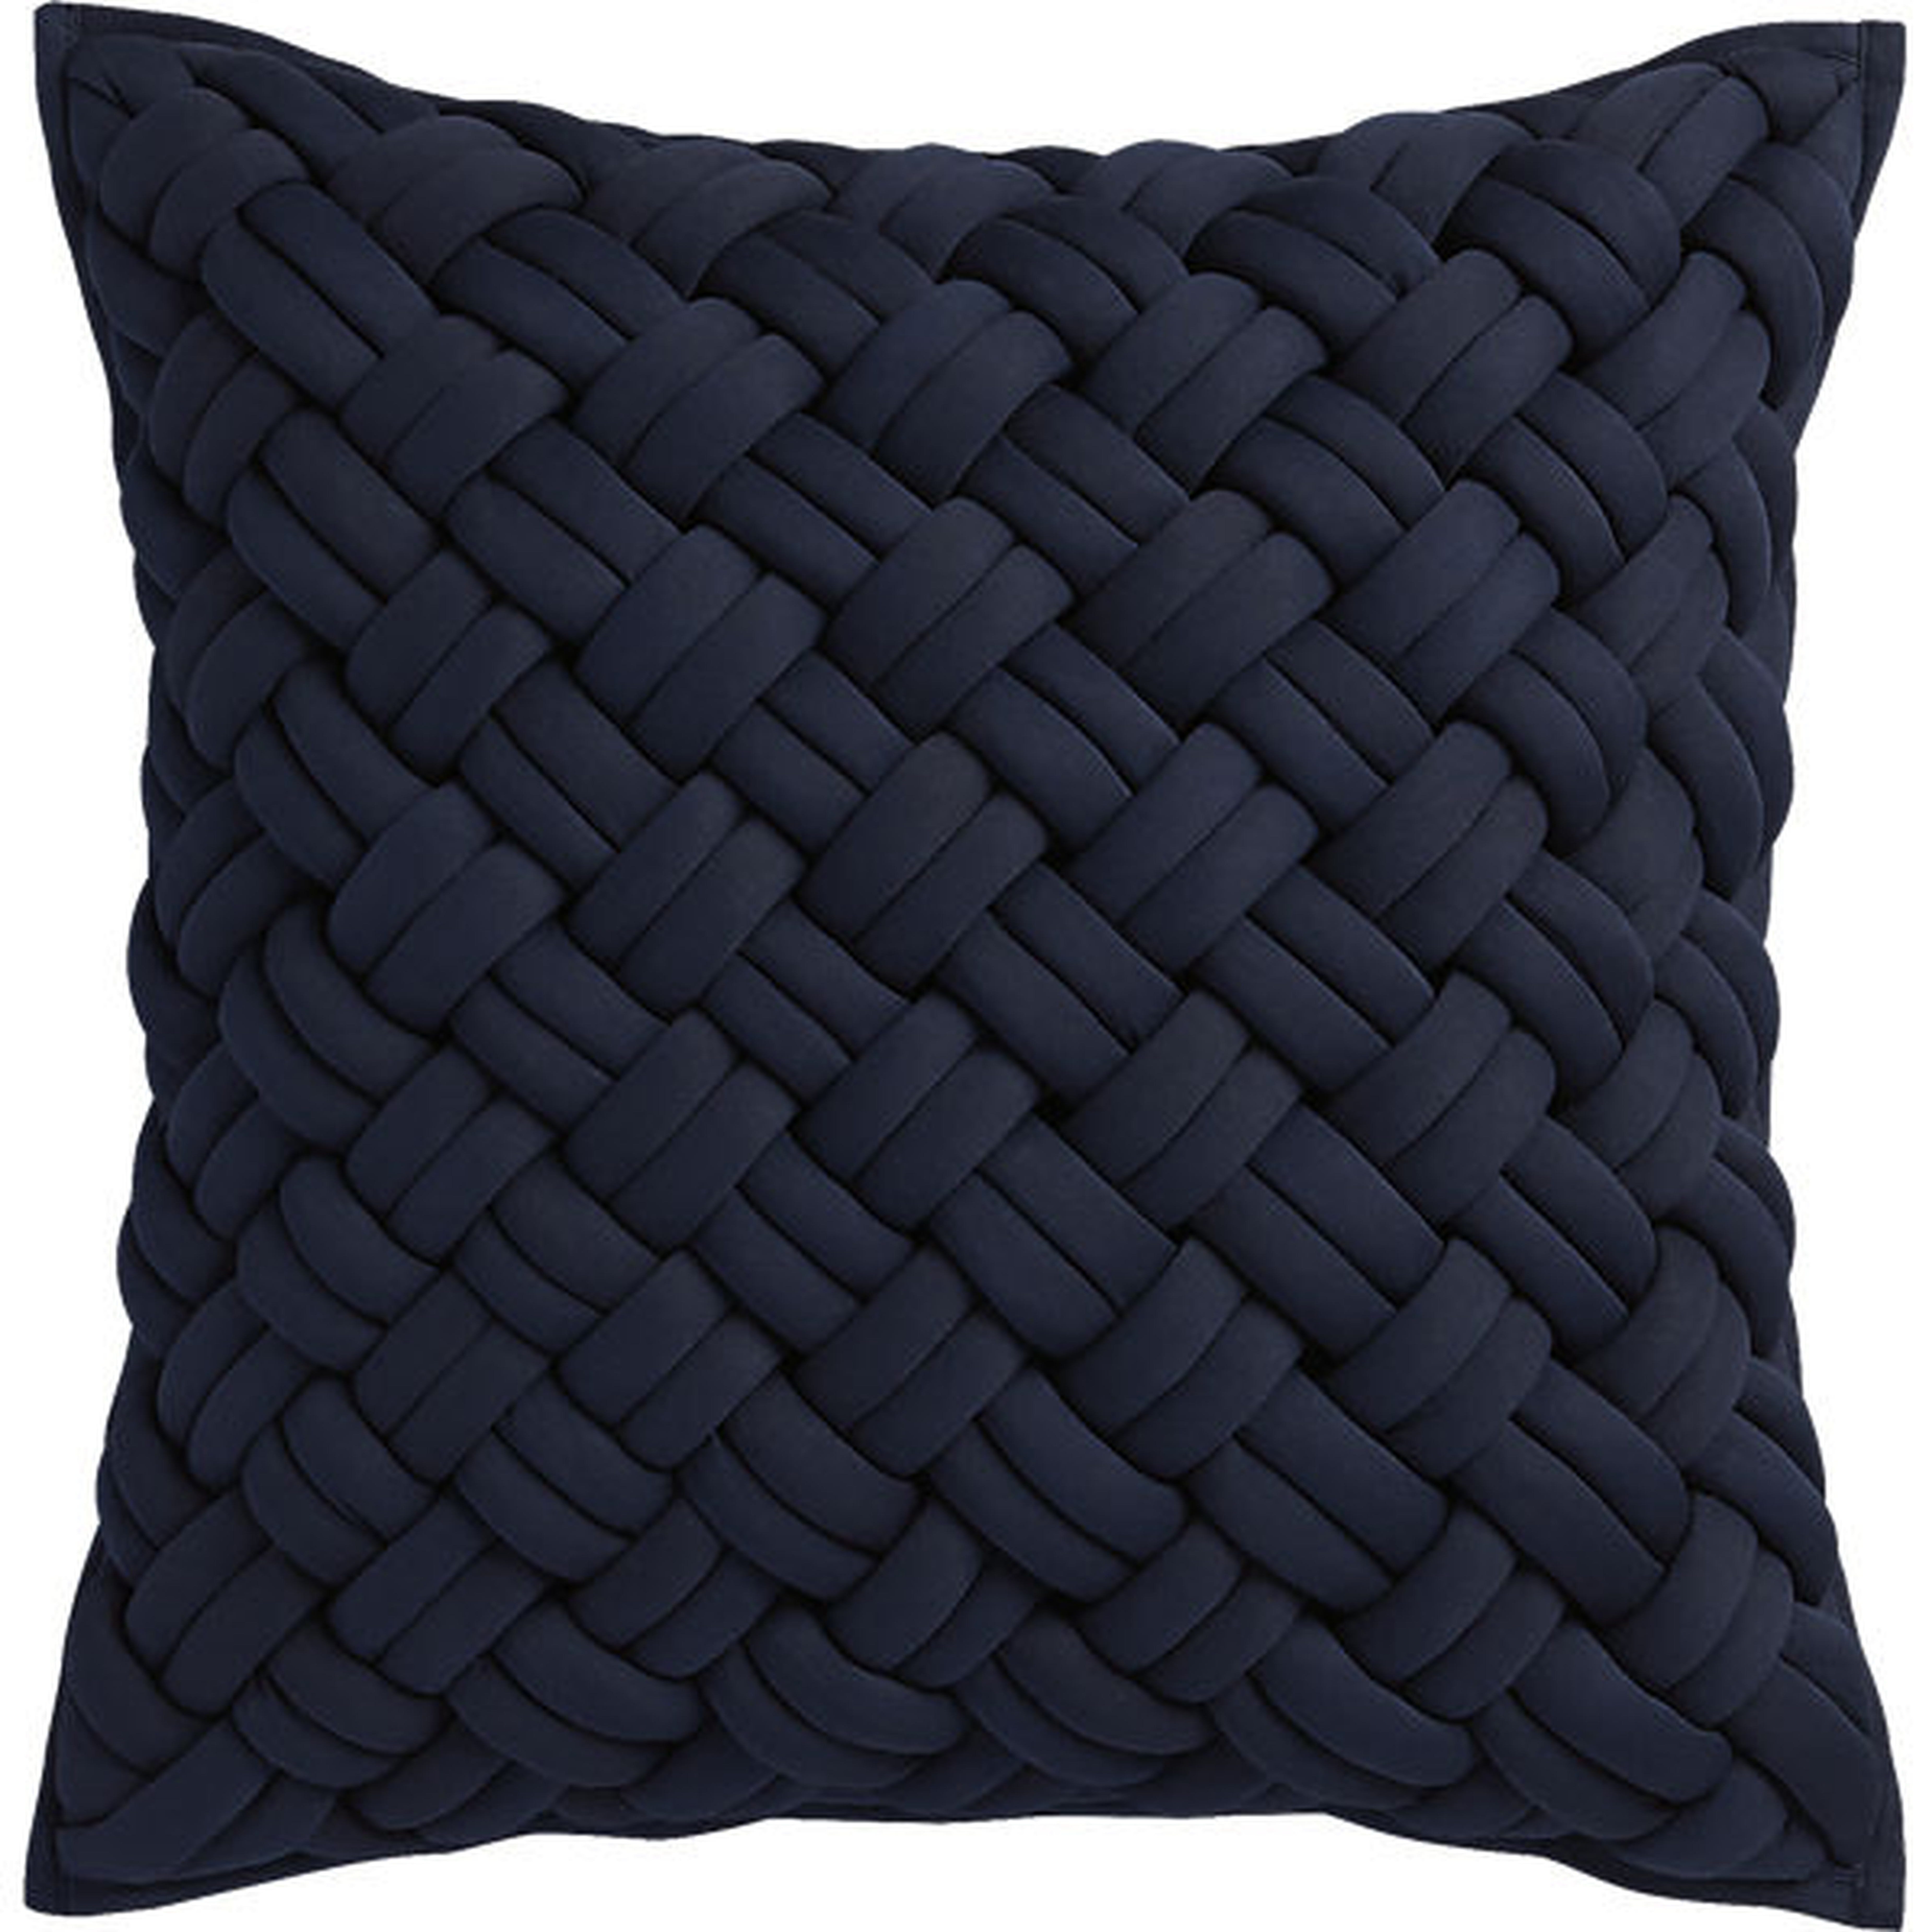 Jersey interknit navy 20" pillow with feather insert - CB2